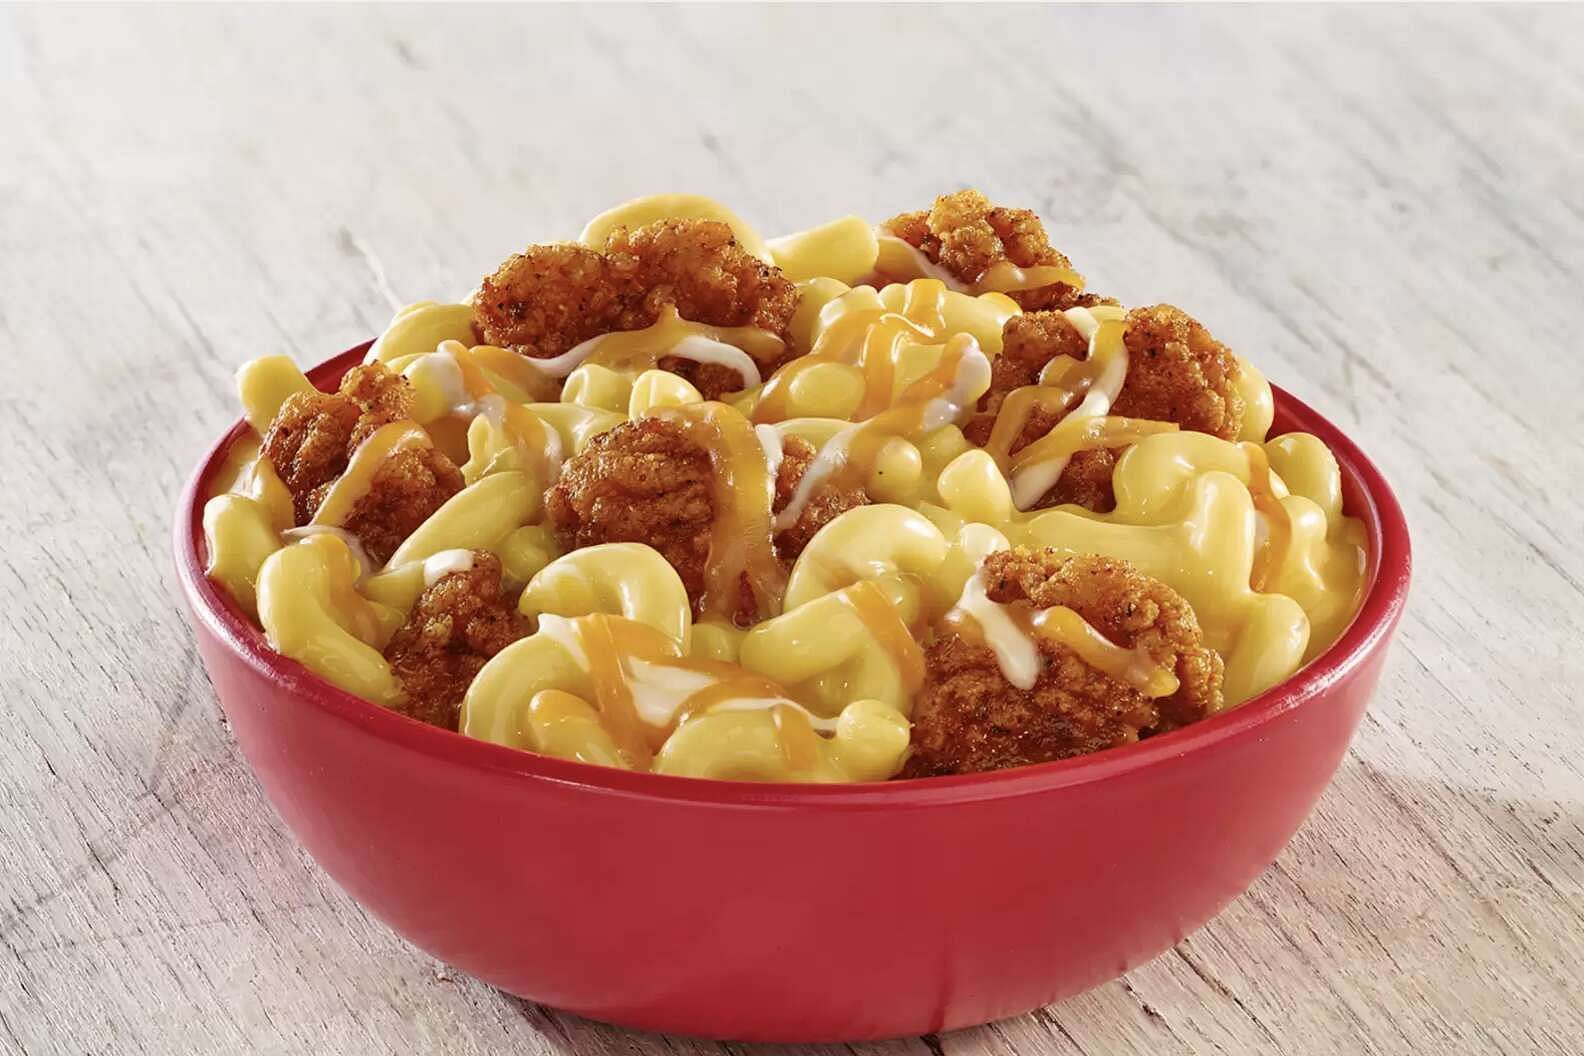 The KFC Mac and Cheese bowl are made with high-quality ingredients. (Image via Pinterest)